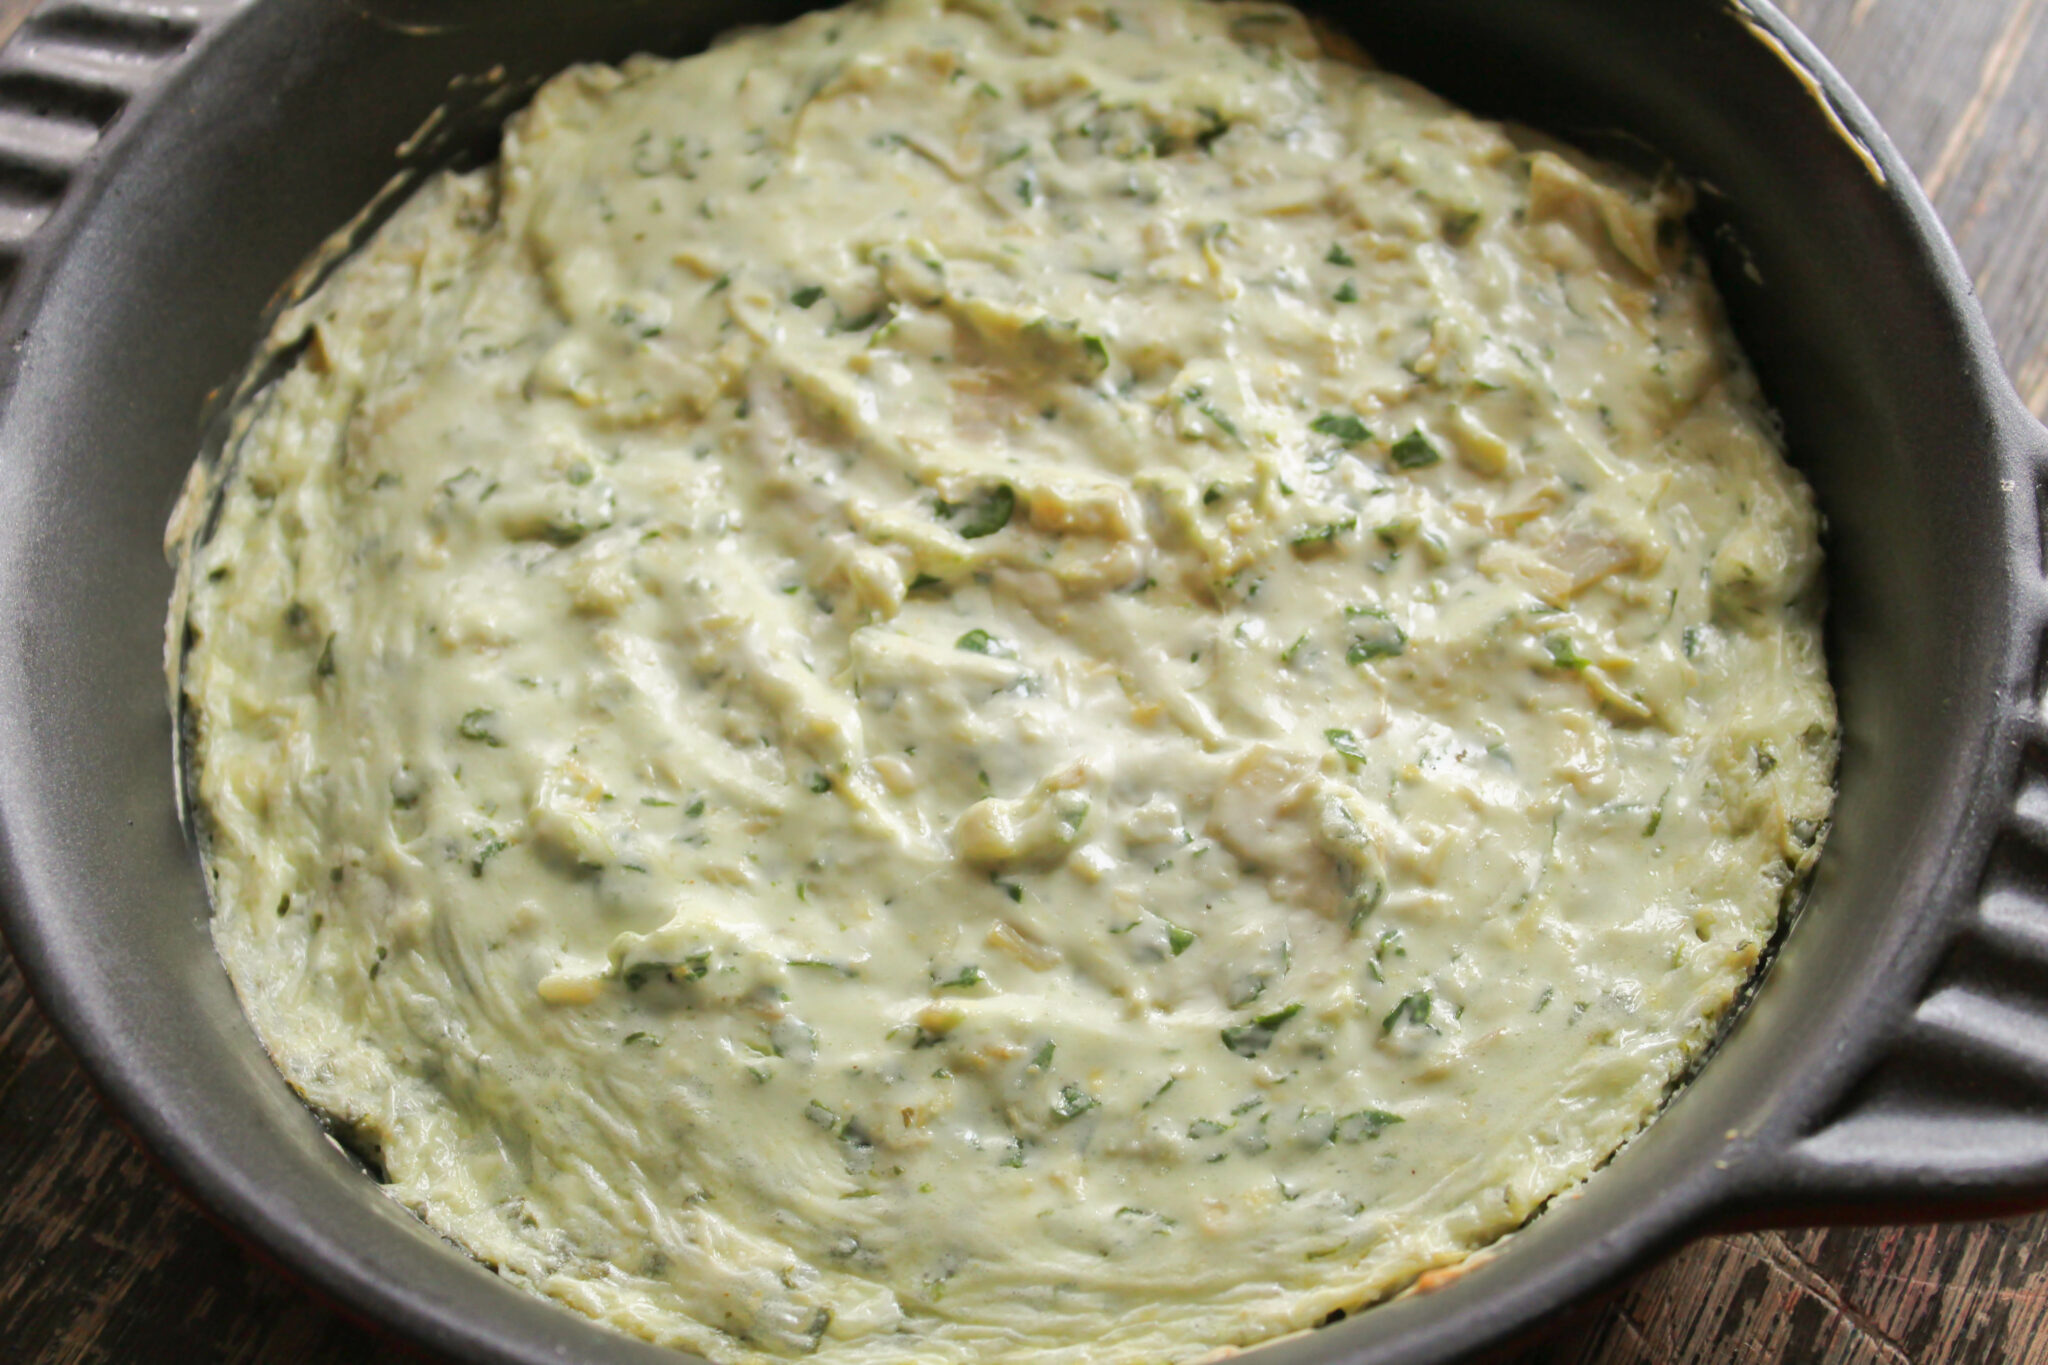 My Light Spinach and Artichoke Dip is a delightful, healthy snack! Serve it with pita chips or veggies!